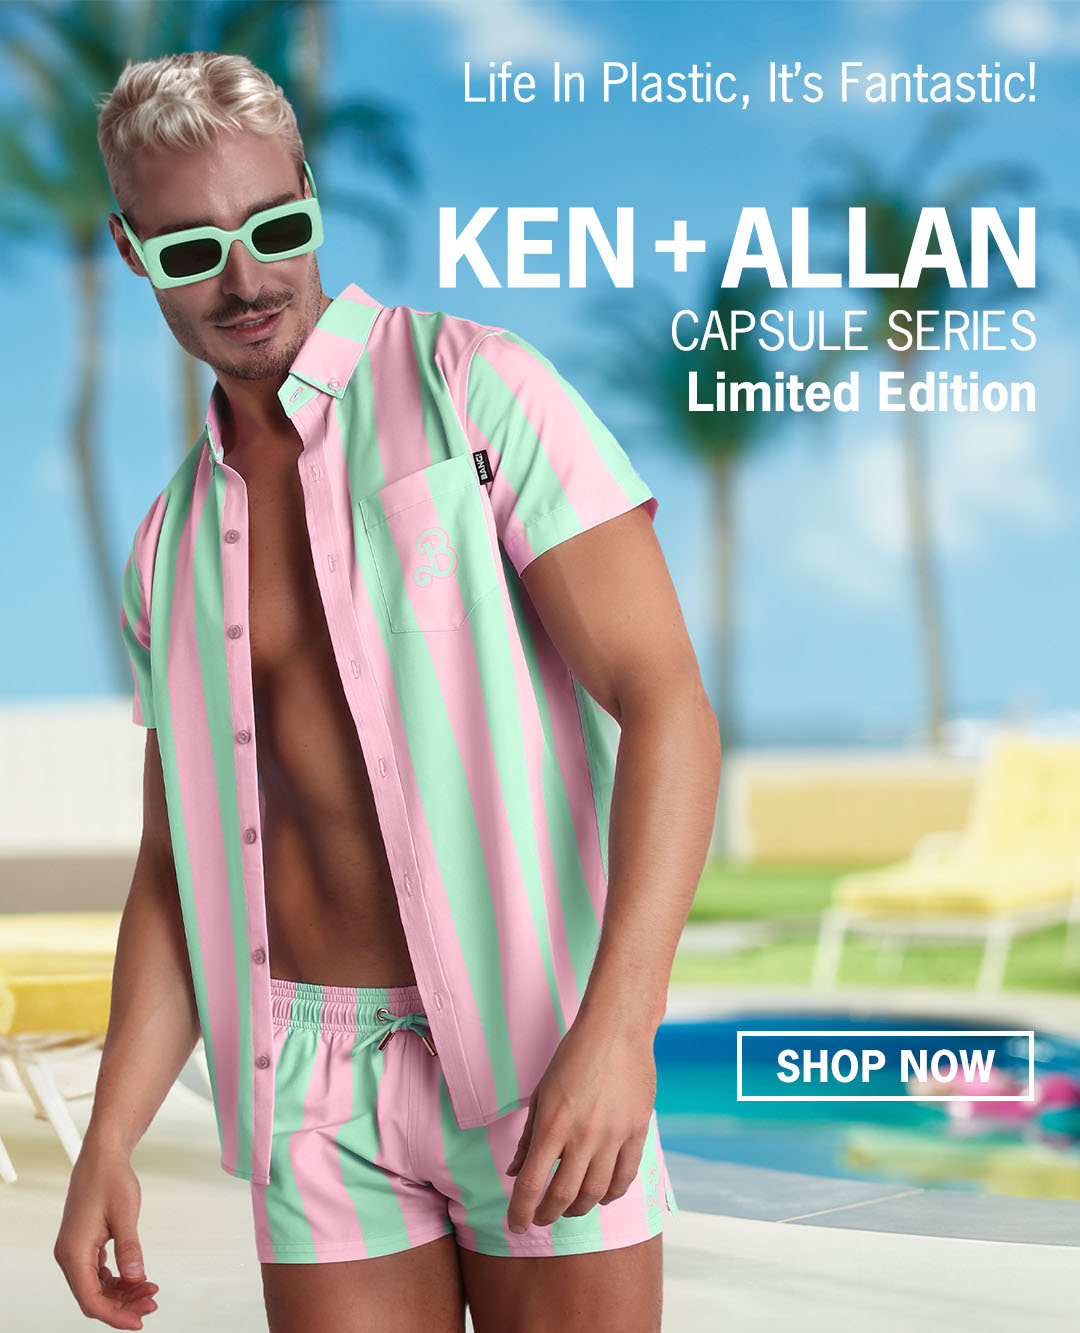 The KEN & ALLAN series by BANG Miami. Featuring men's beach shorts and short-sleeve shirts as seen on Barbie Movie worn by Ryan Gosling as Ken and Michael Cera as Allan.